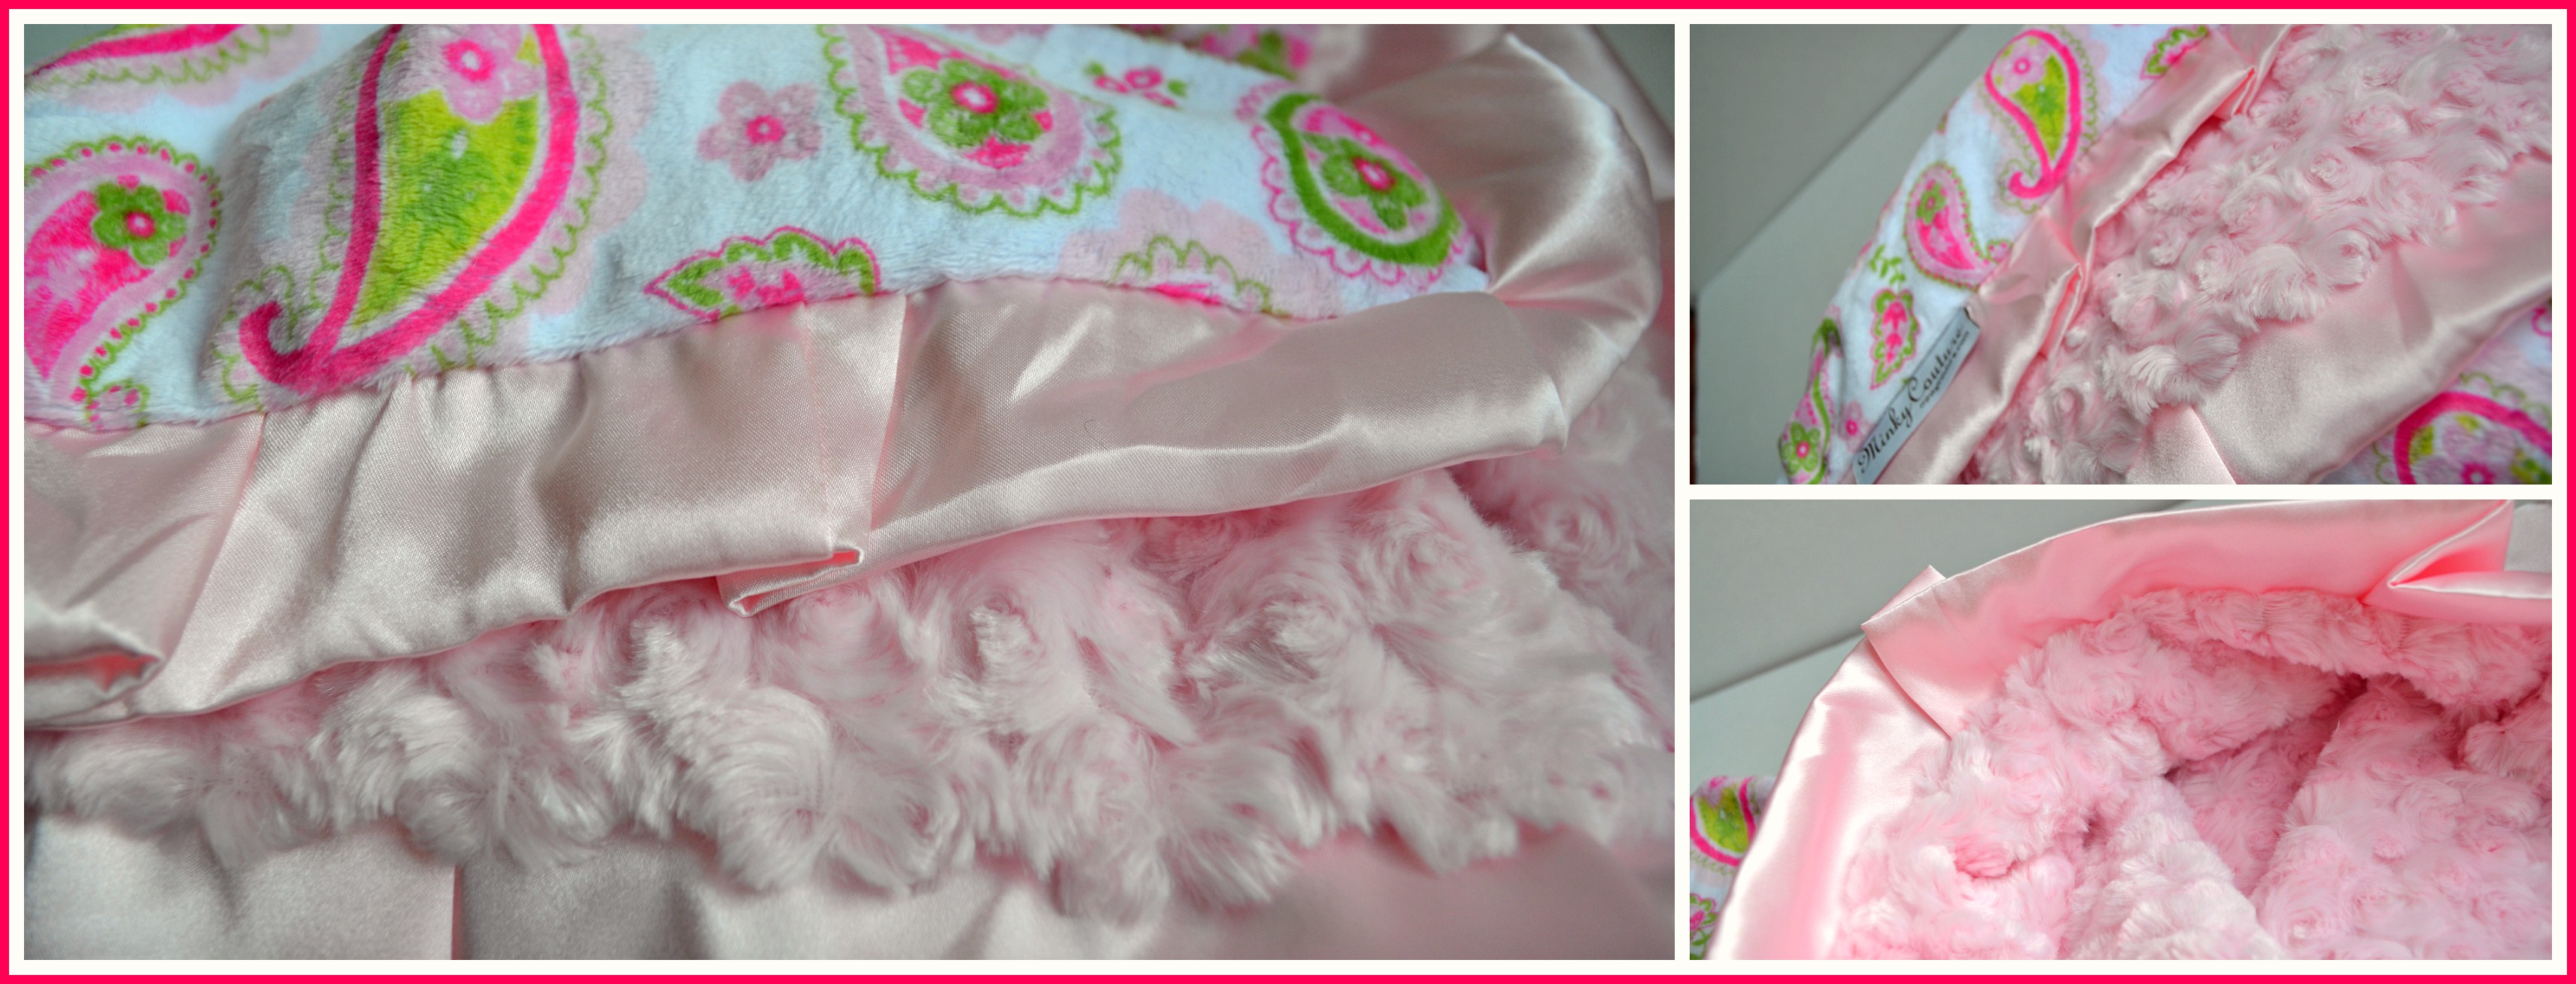 Minky Couture Infant Blanket Review (Getting Ready For Baby Gift Guide)